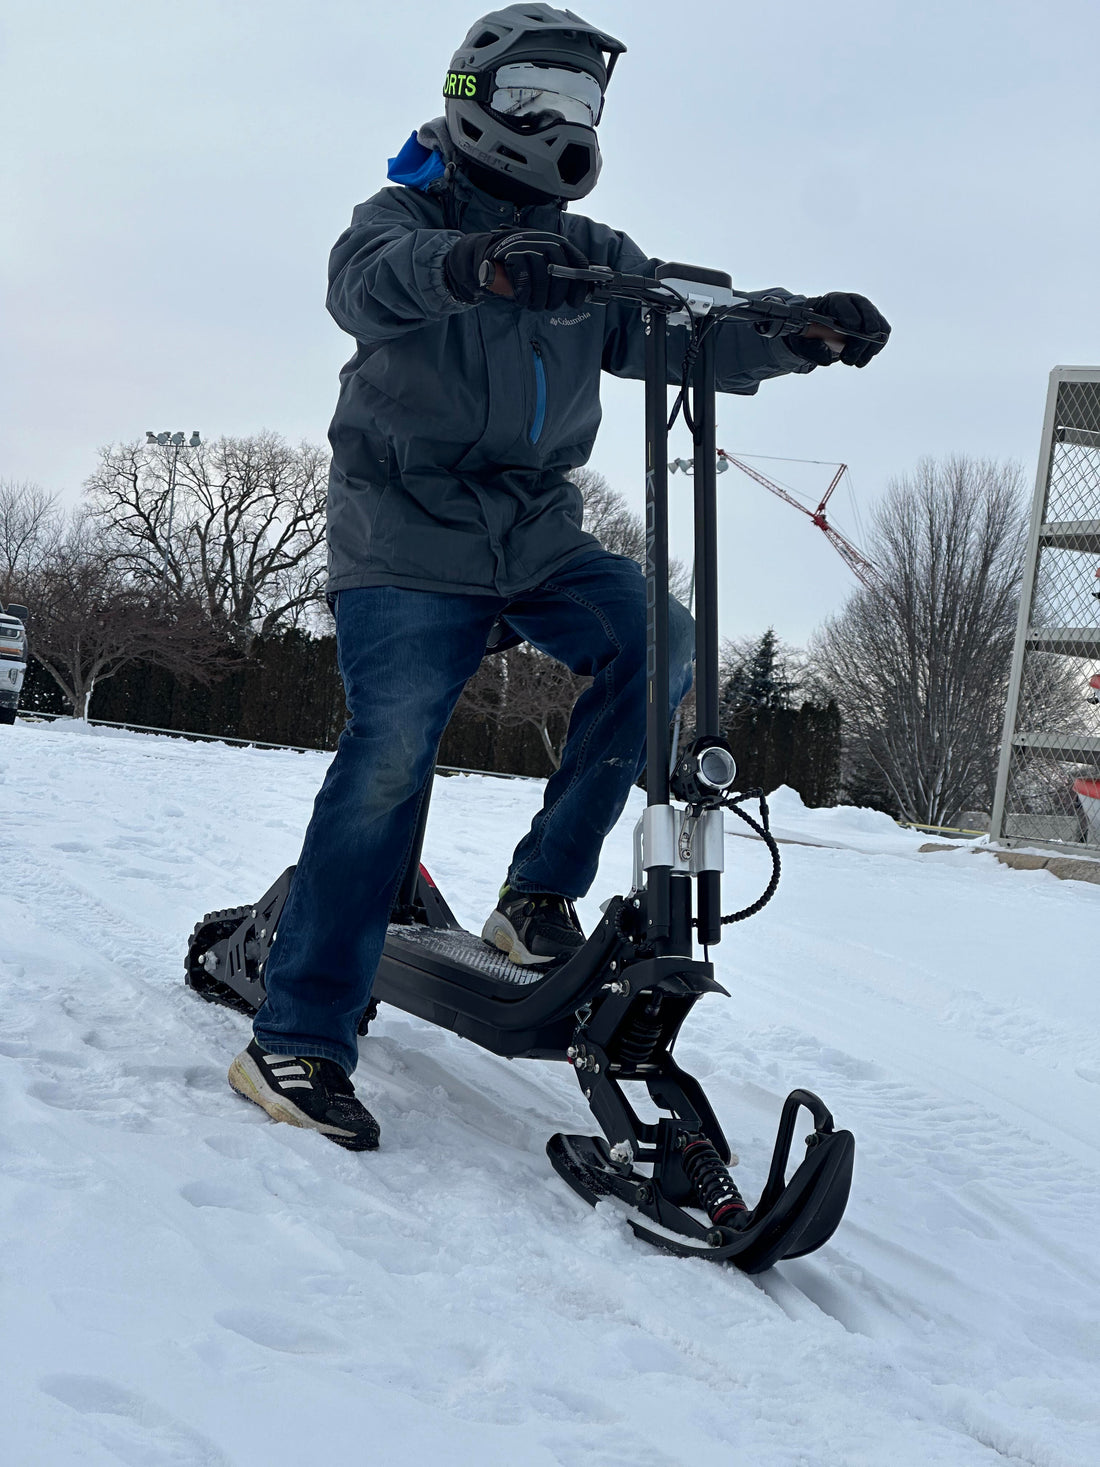 The KOMOTO X1500 Electric Snow Scooter